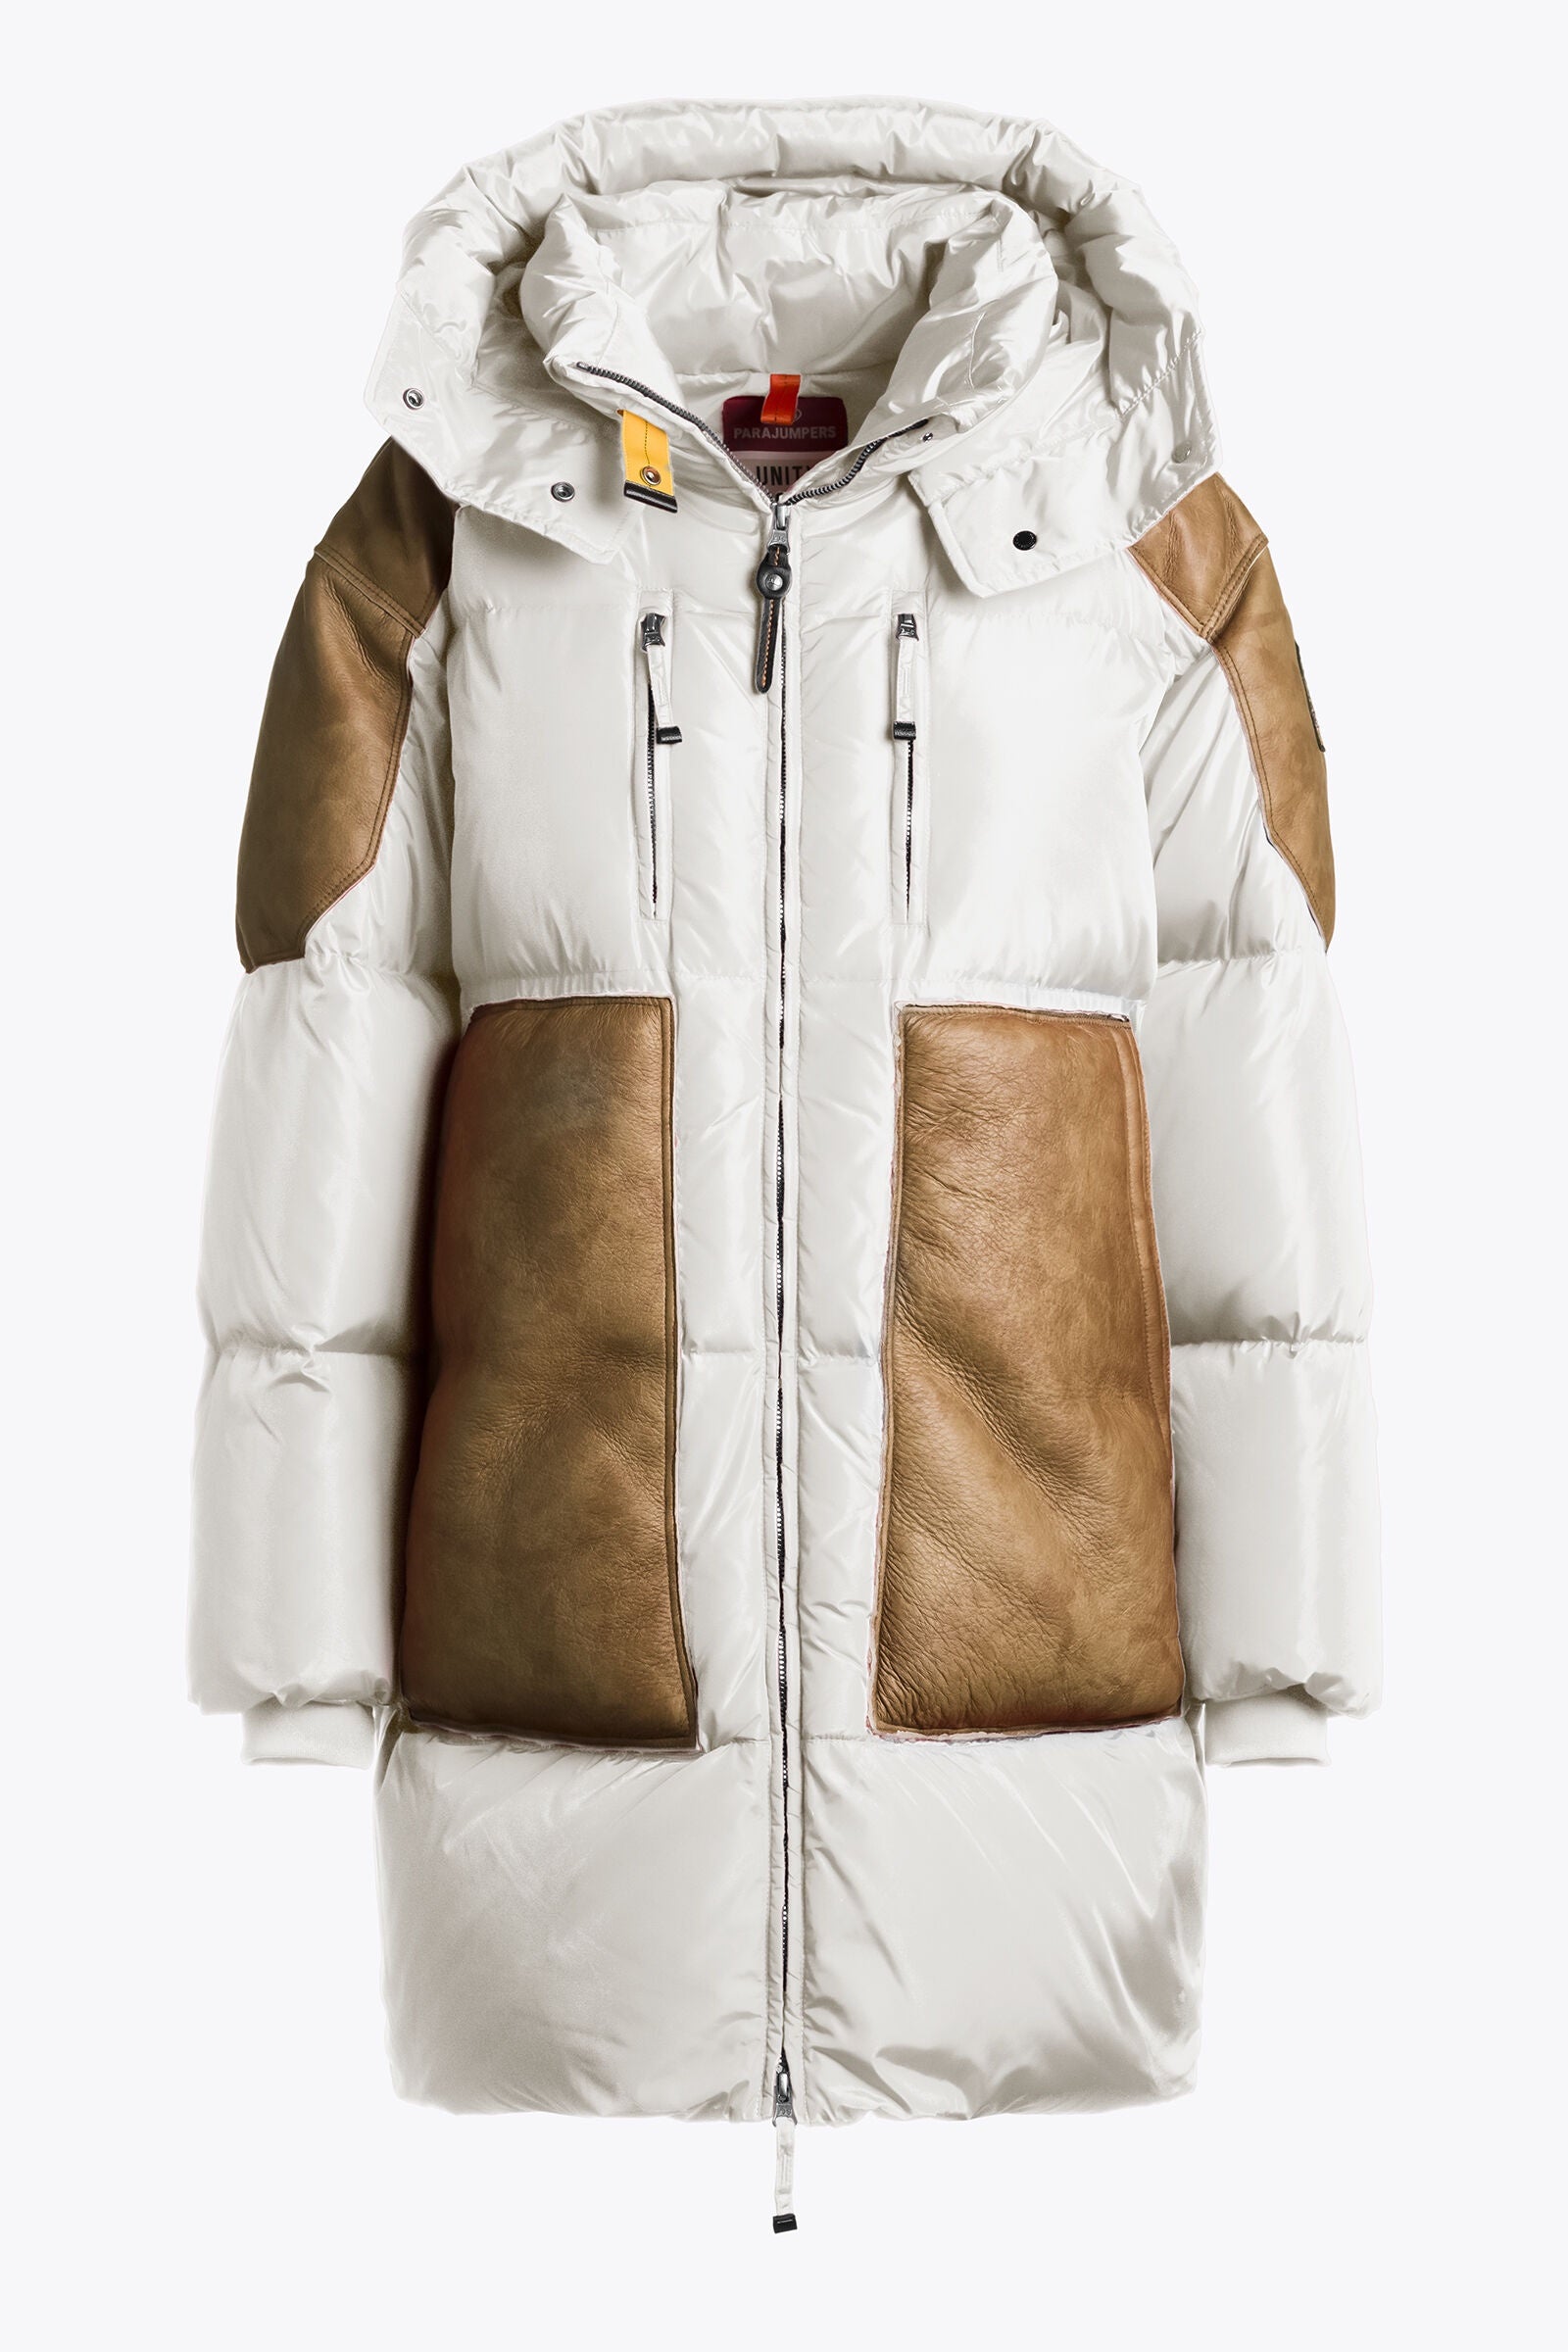 Parajumpers Women's Winter Jacket in WHITE ON SALE Saratoga Saddlery & International Boutiques